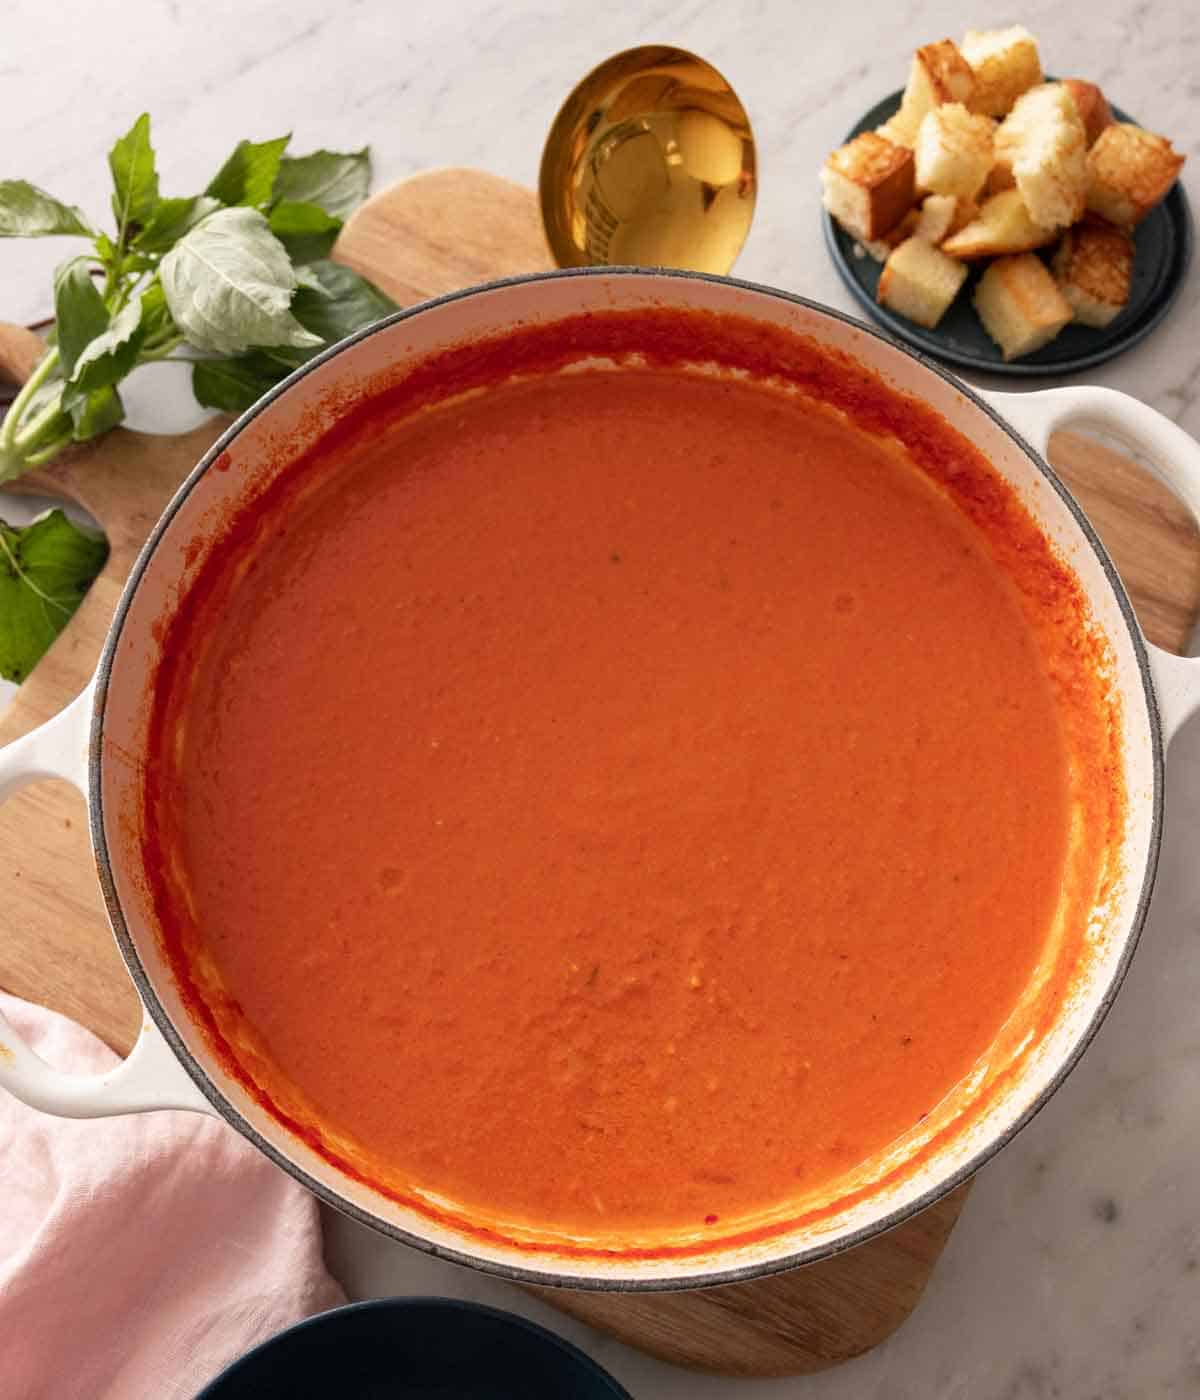 Overhead view of a pot of tomato soup.